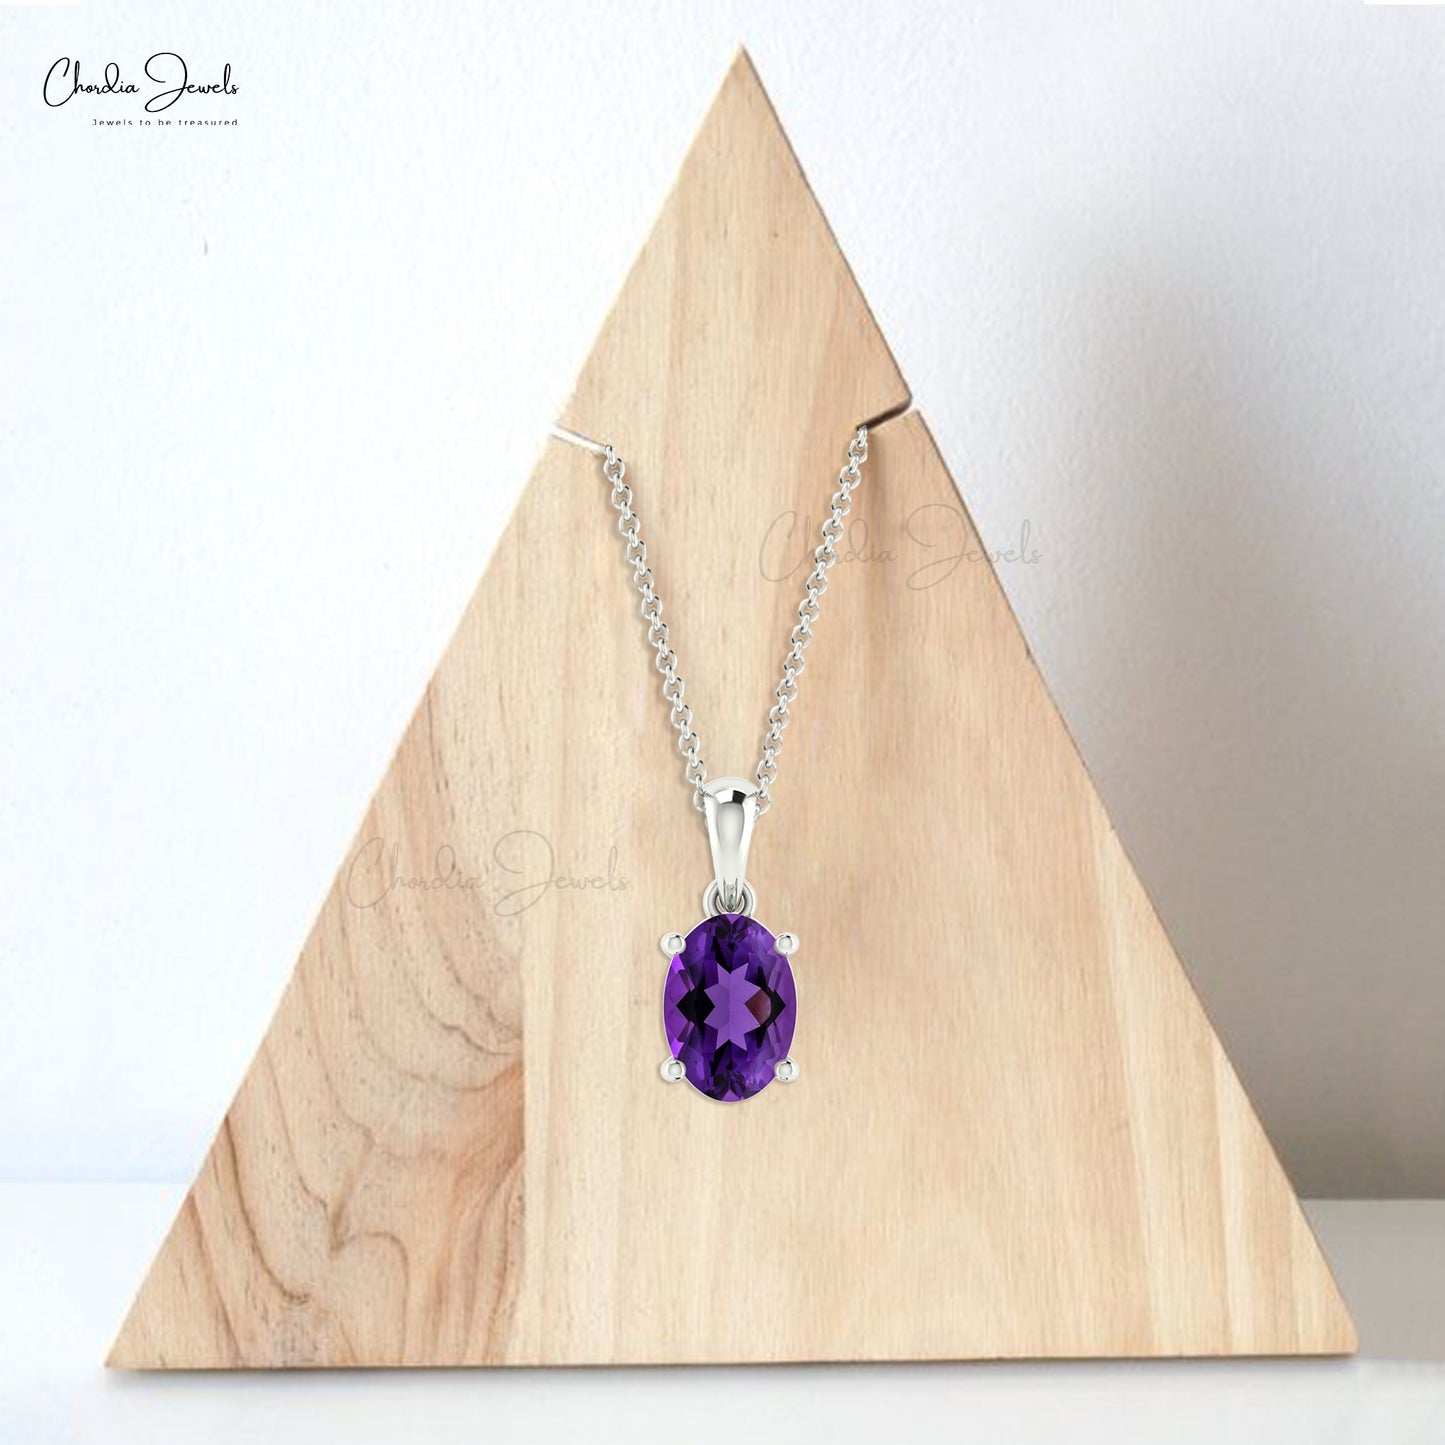 Natural Amethyst Pendant, 14k Solid Gold Prong Set Pendant, 7x5mm Oval Faceted Gemstone Handmade Pendant Gift for Women